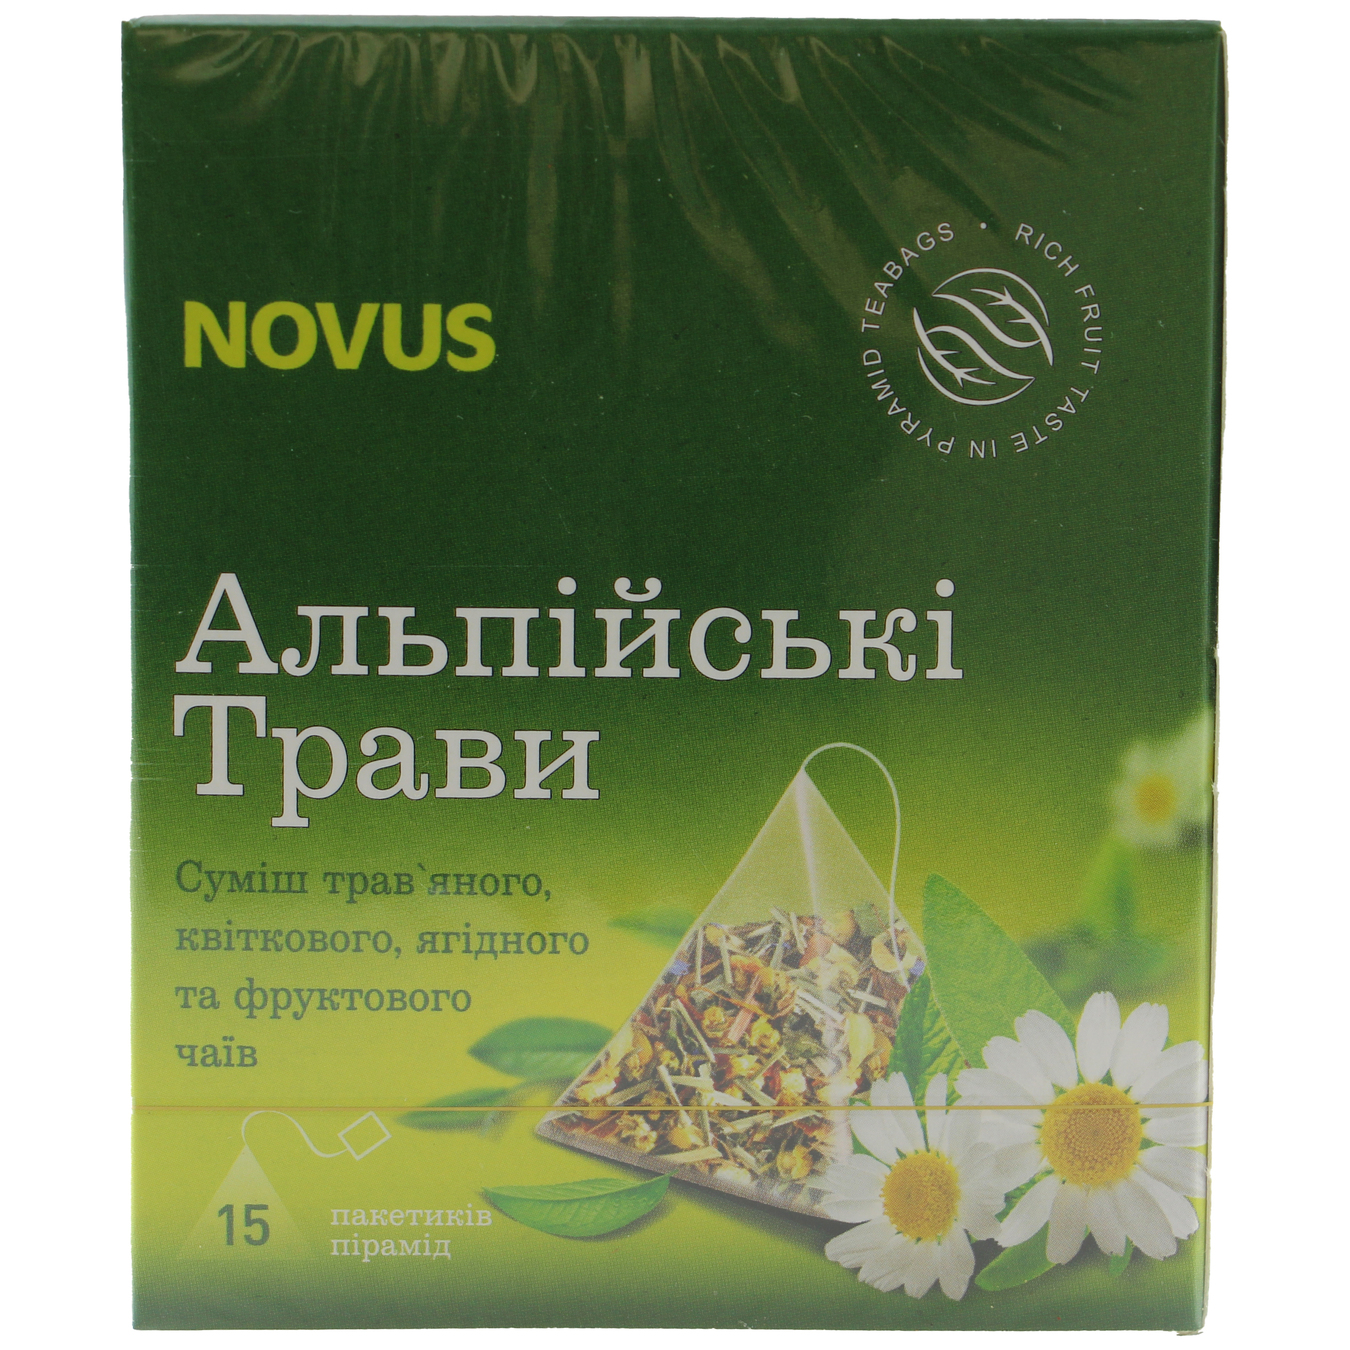 Novus Alpine Herbs Mixture of Herbal with Flower Fruit and Fruit and Berry Tea 2g 15pcs